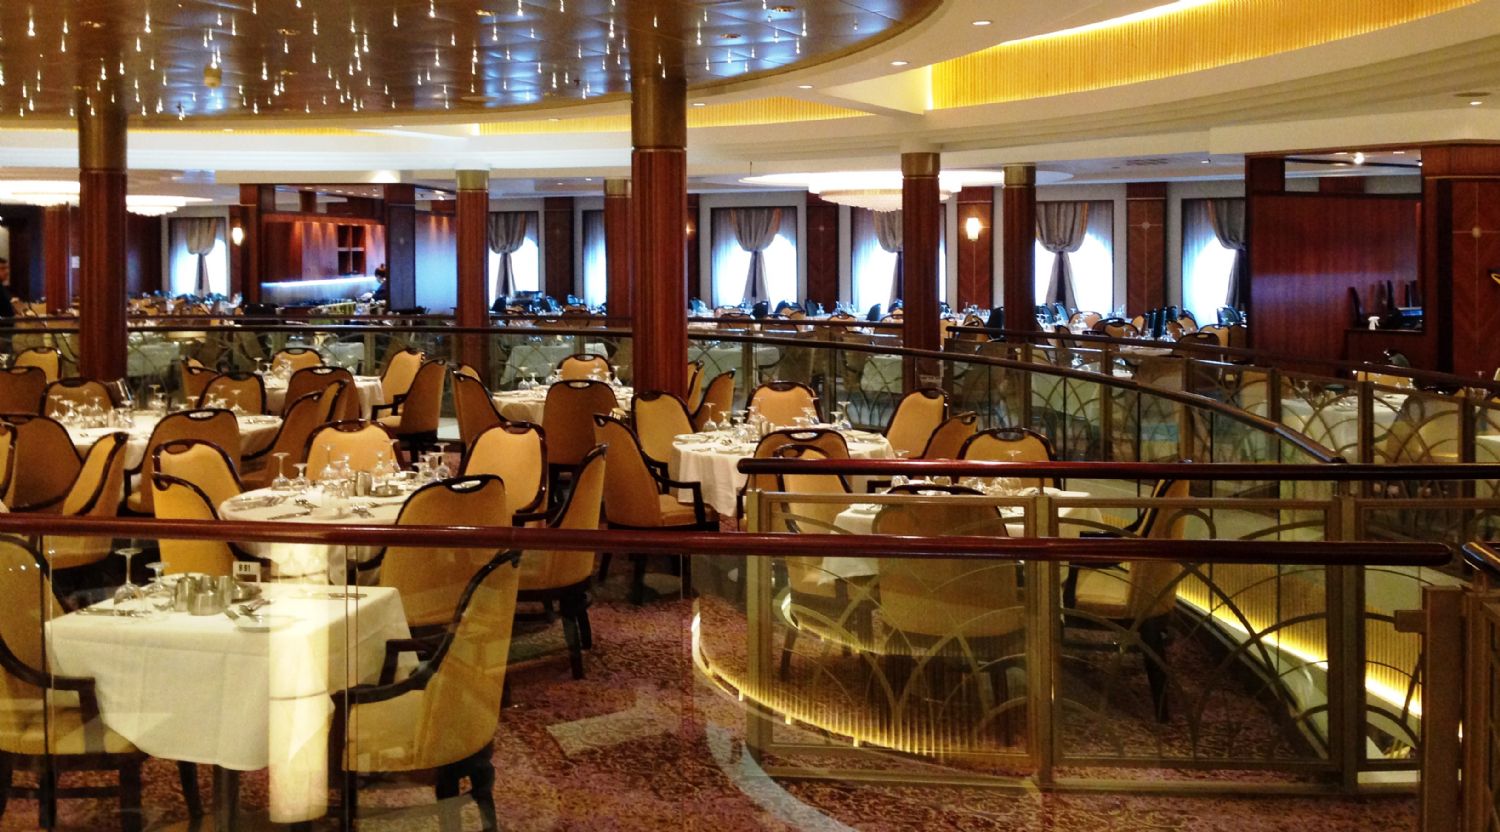 Oasis Of The Seas Dining Room Pictures